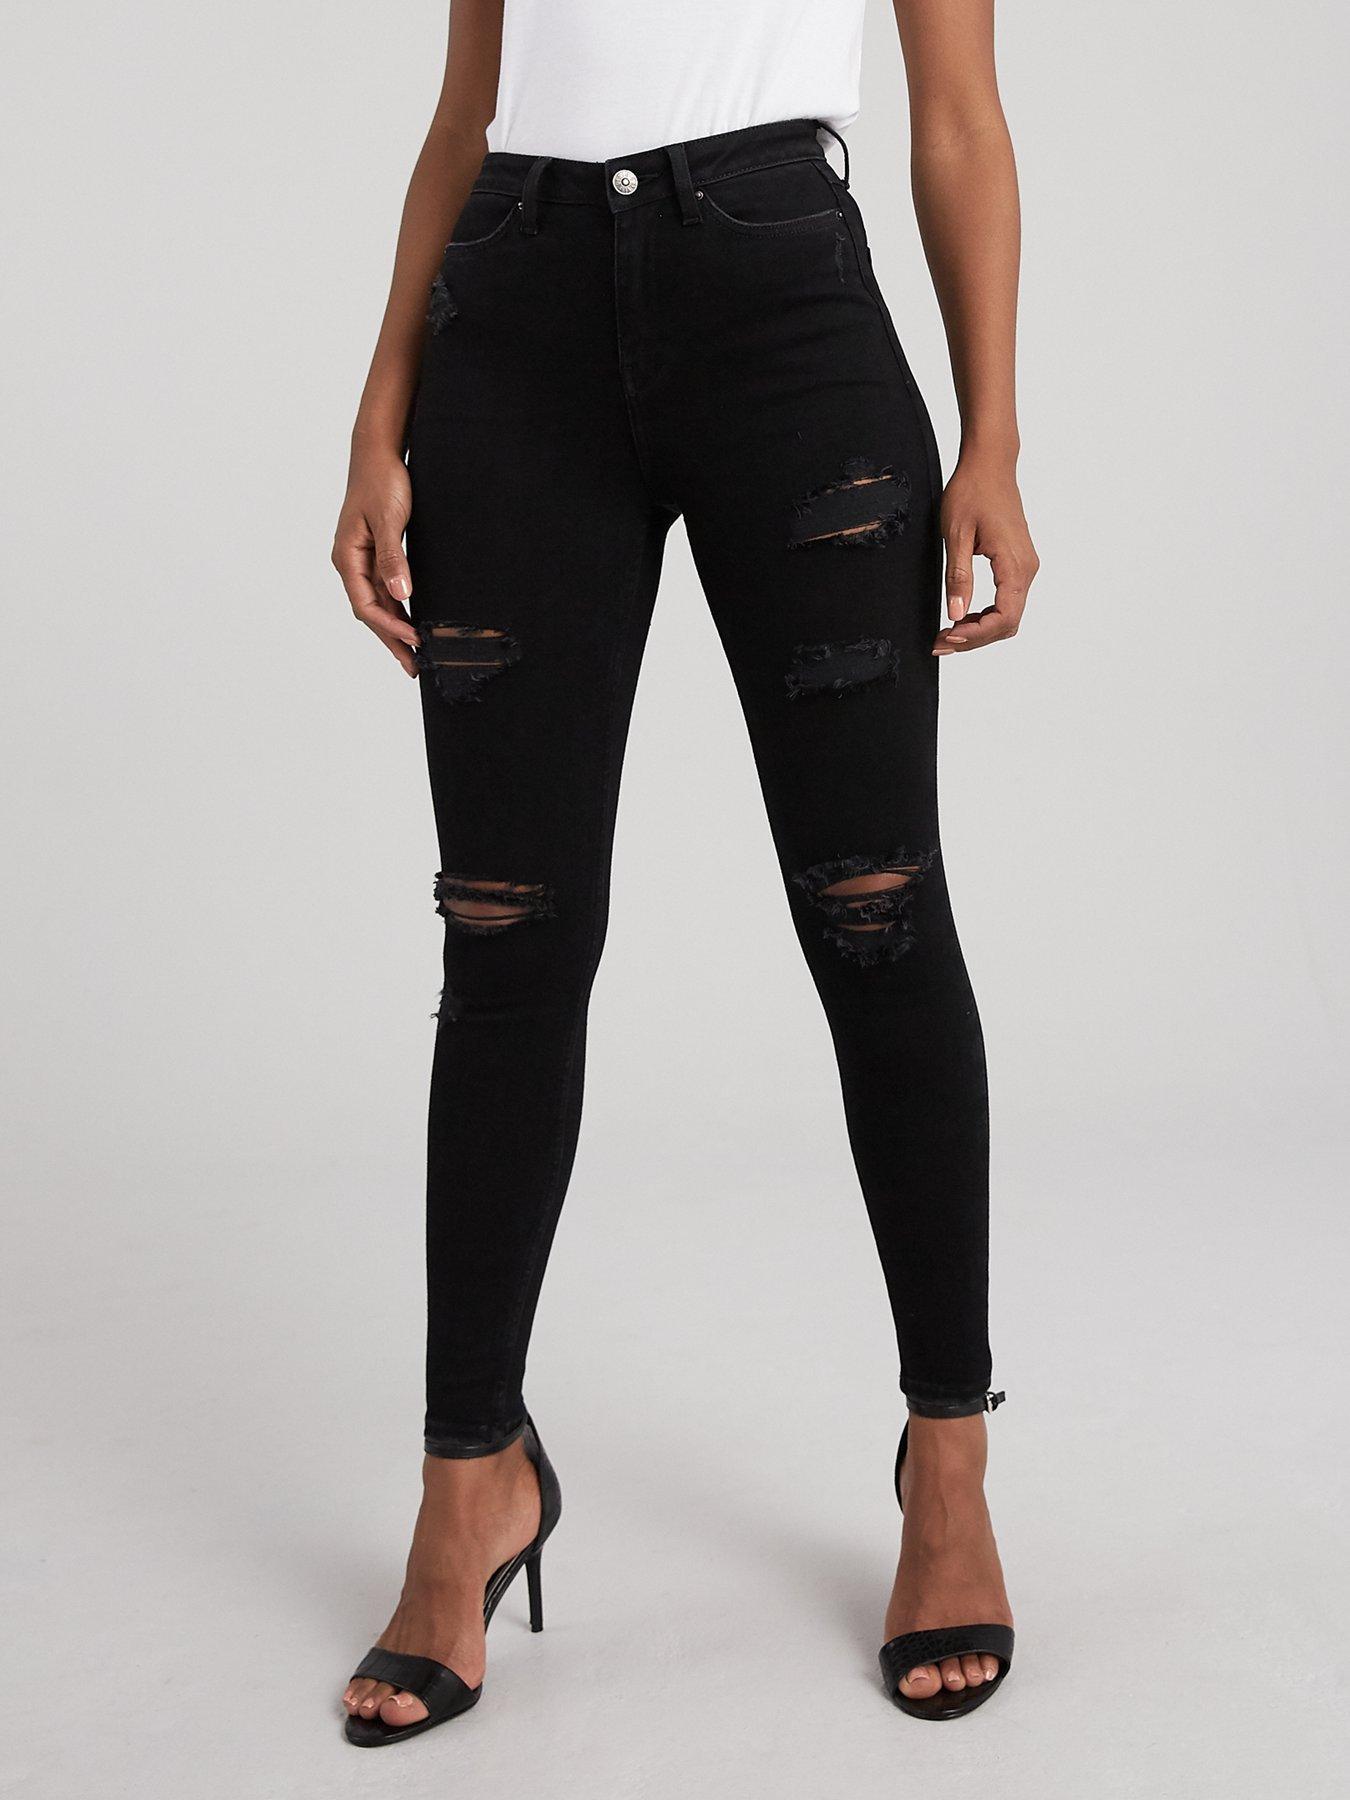 Ripped Jeans | Women's Ripped Distressed |